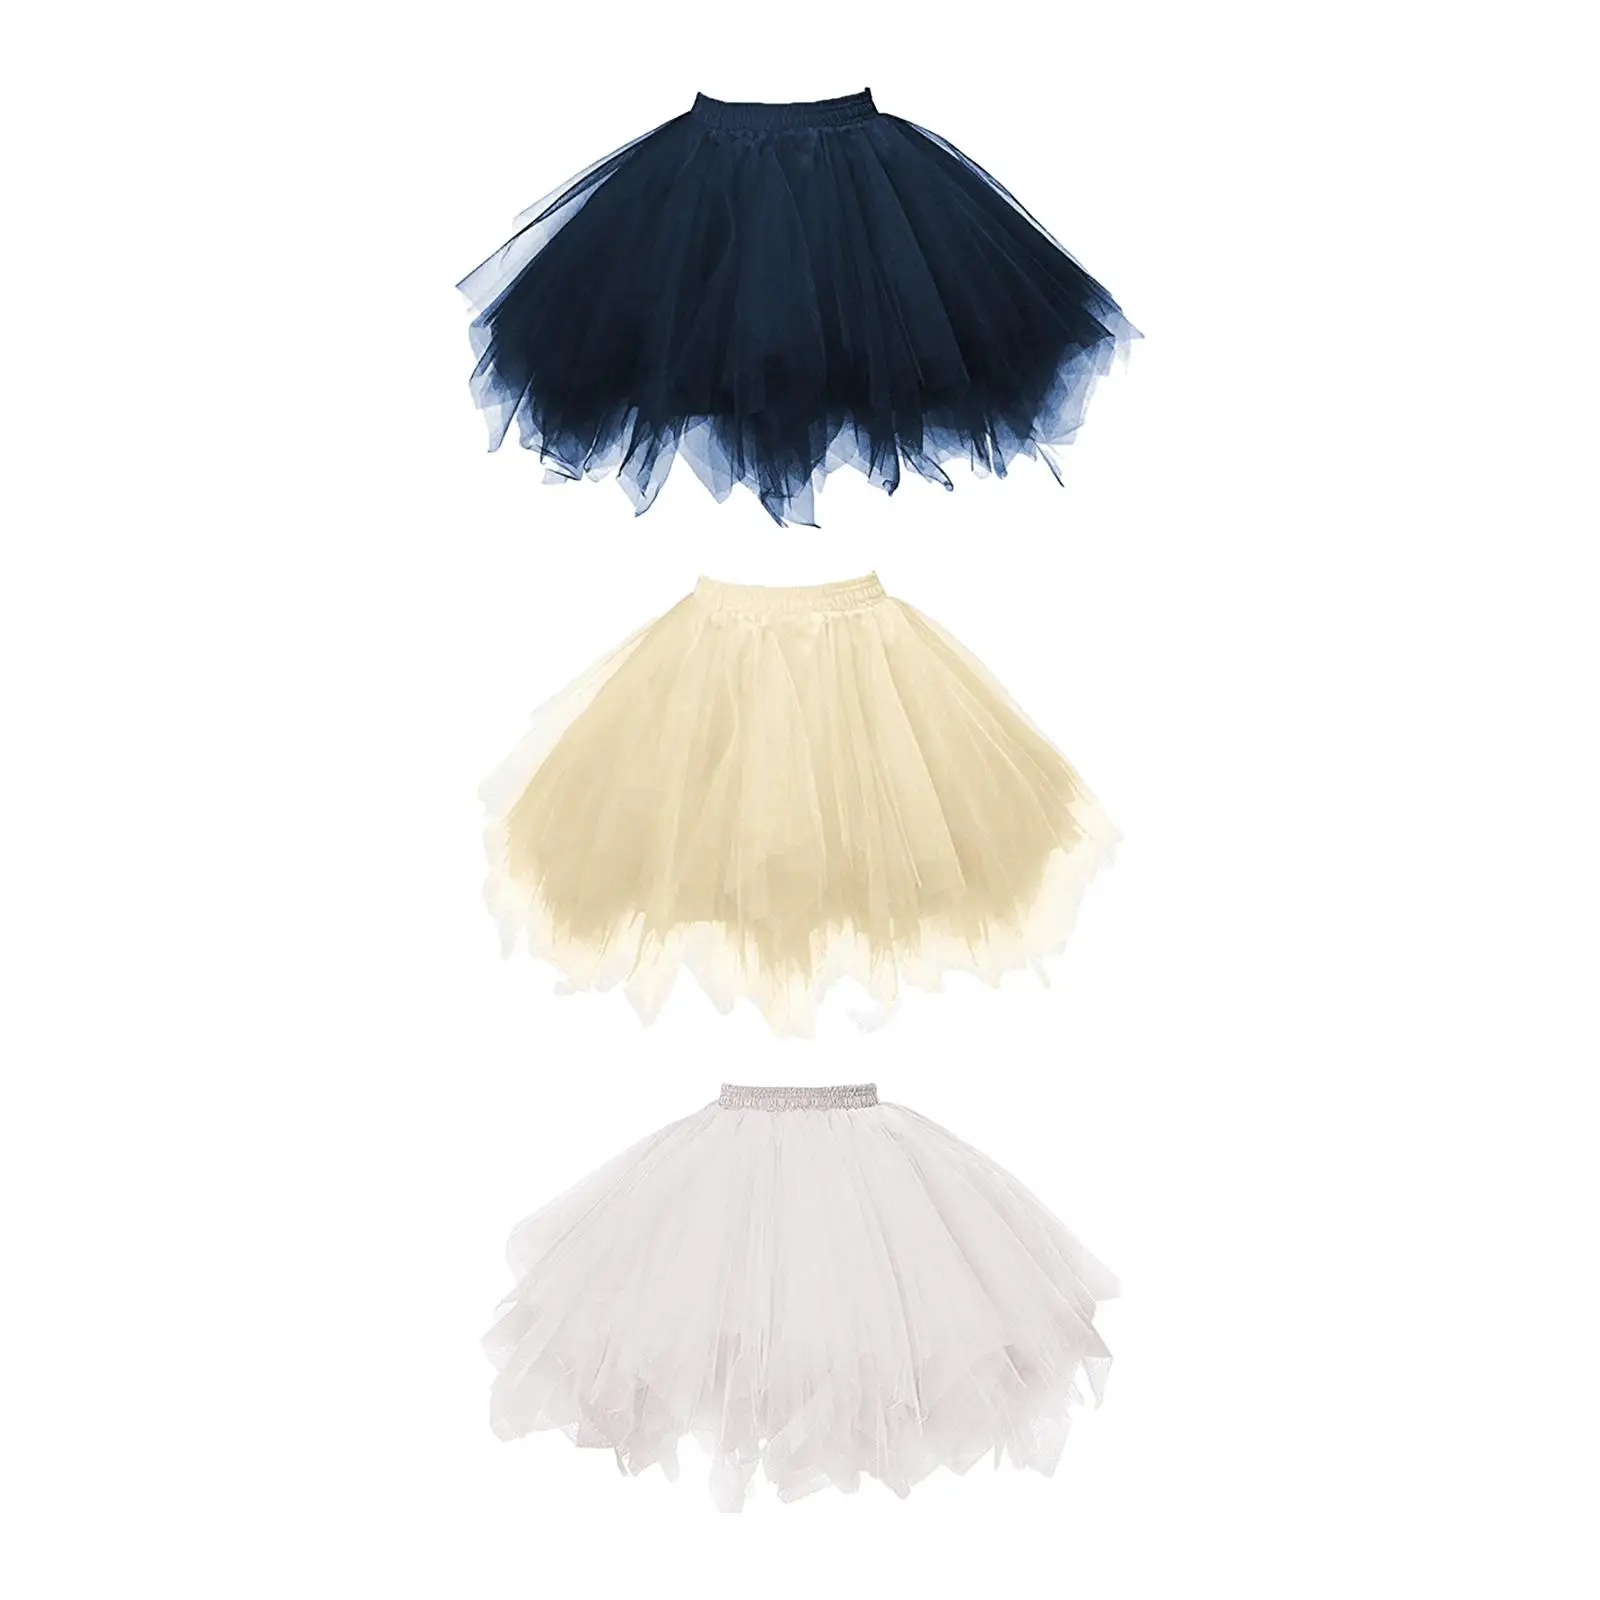 Women Tulle Tutu Skirt Dress up Ballet Dance Girl Lady Party Tulle Petticoat for Wedding Rehearsal Stage Performance Night Club